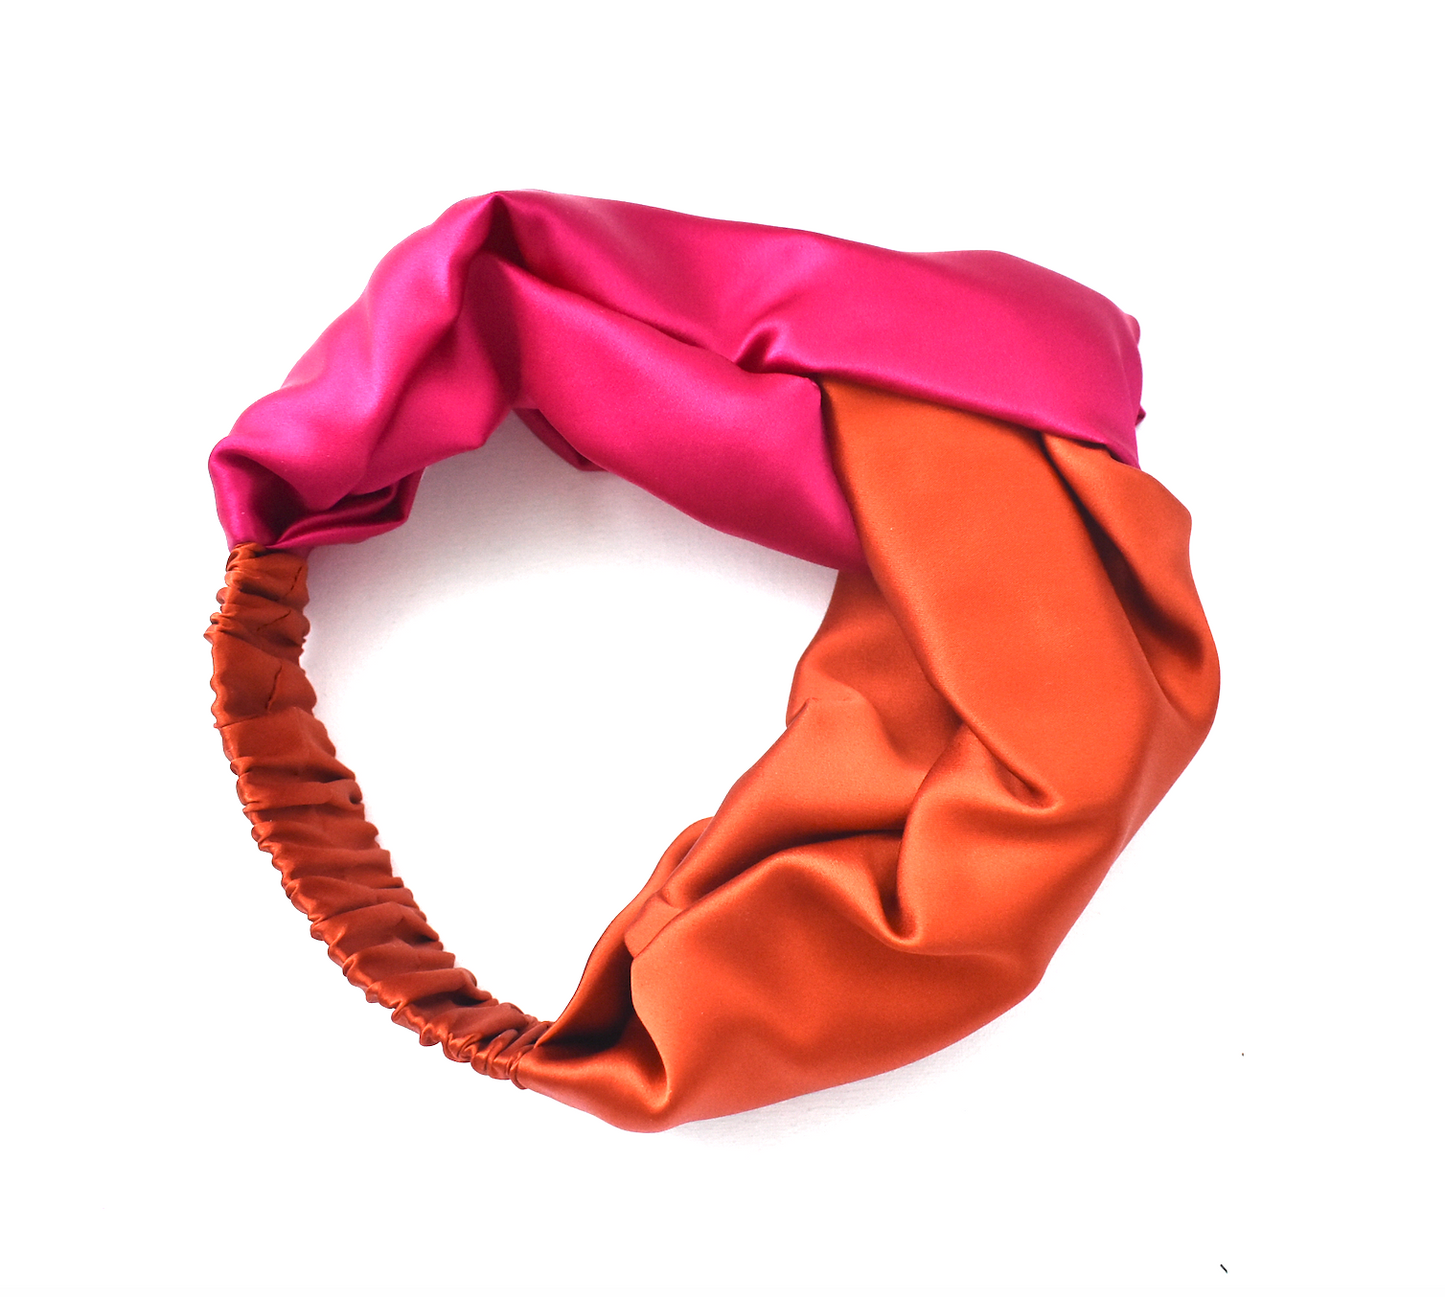 Pure Silk Burnt Orange and Fuchsia Pink Split Twisted Turban hairband and neck scarf in Mulberry Silk - 100% Pure Silk-Satin